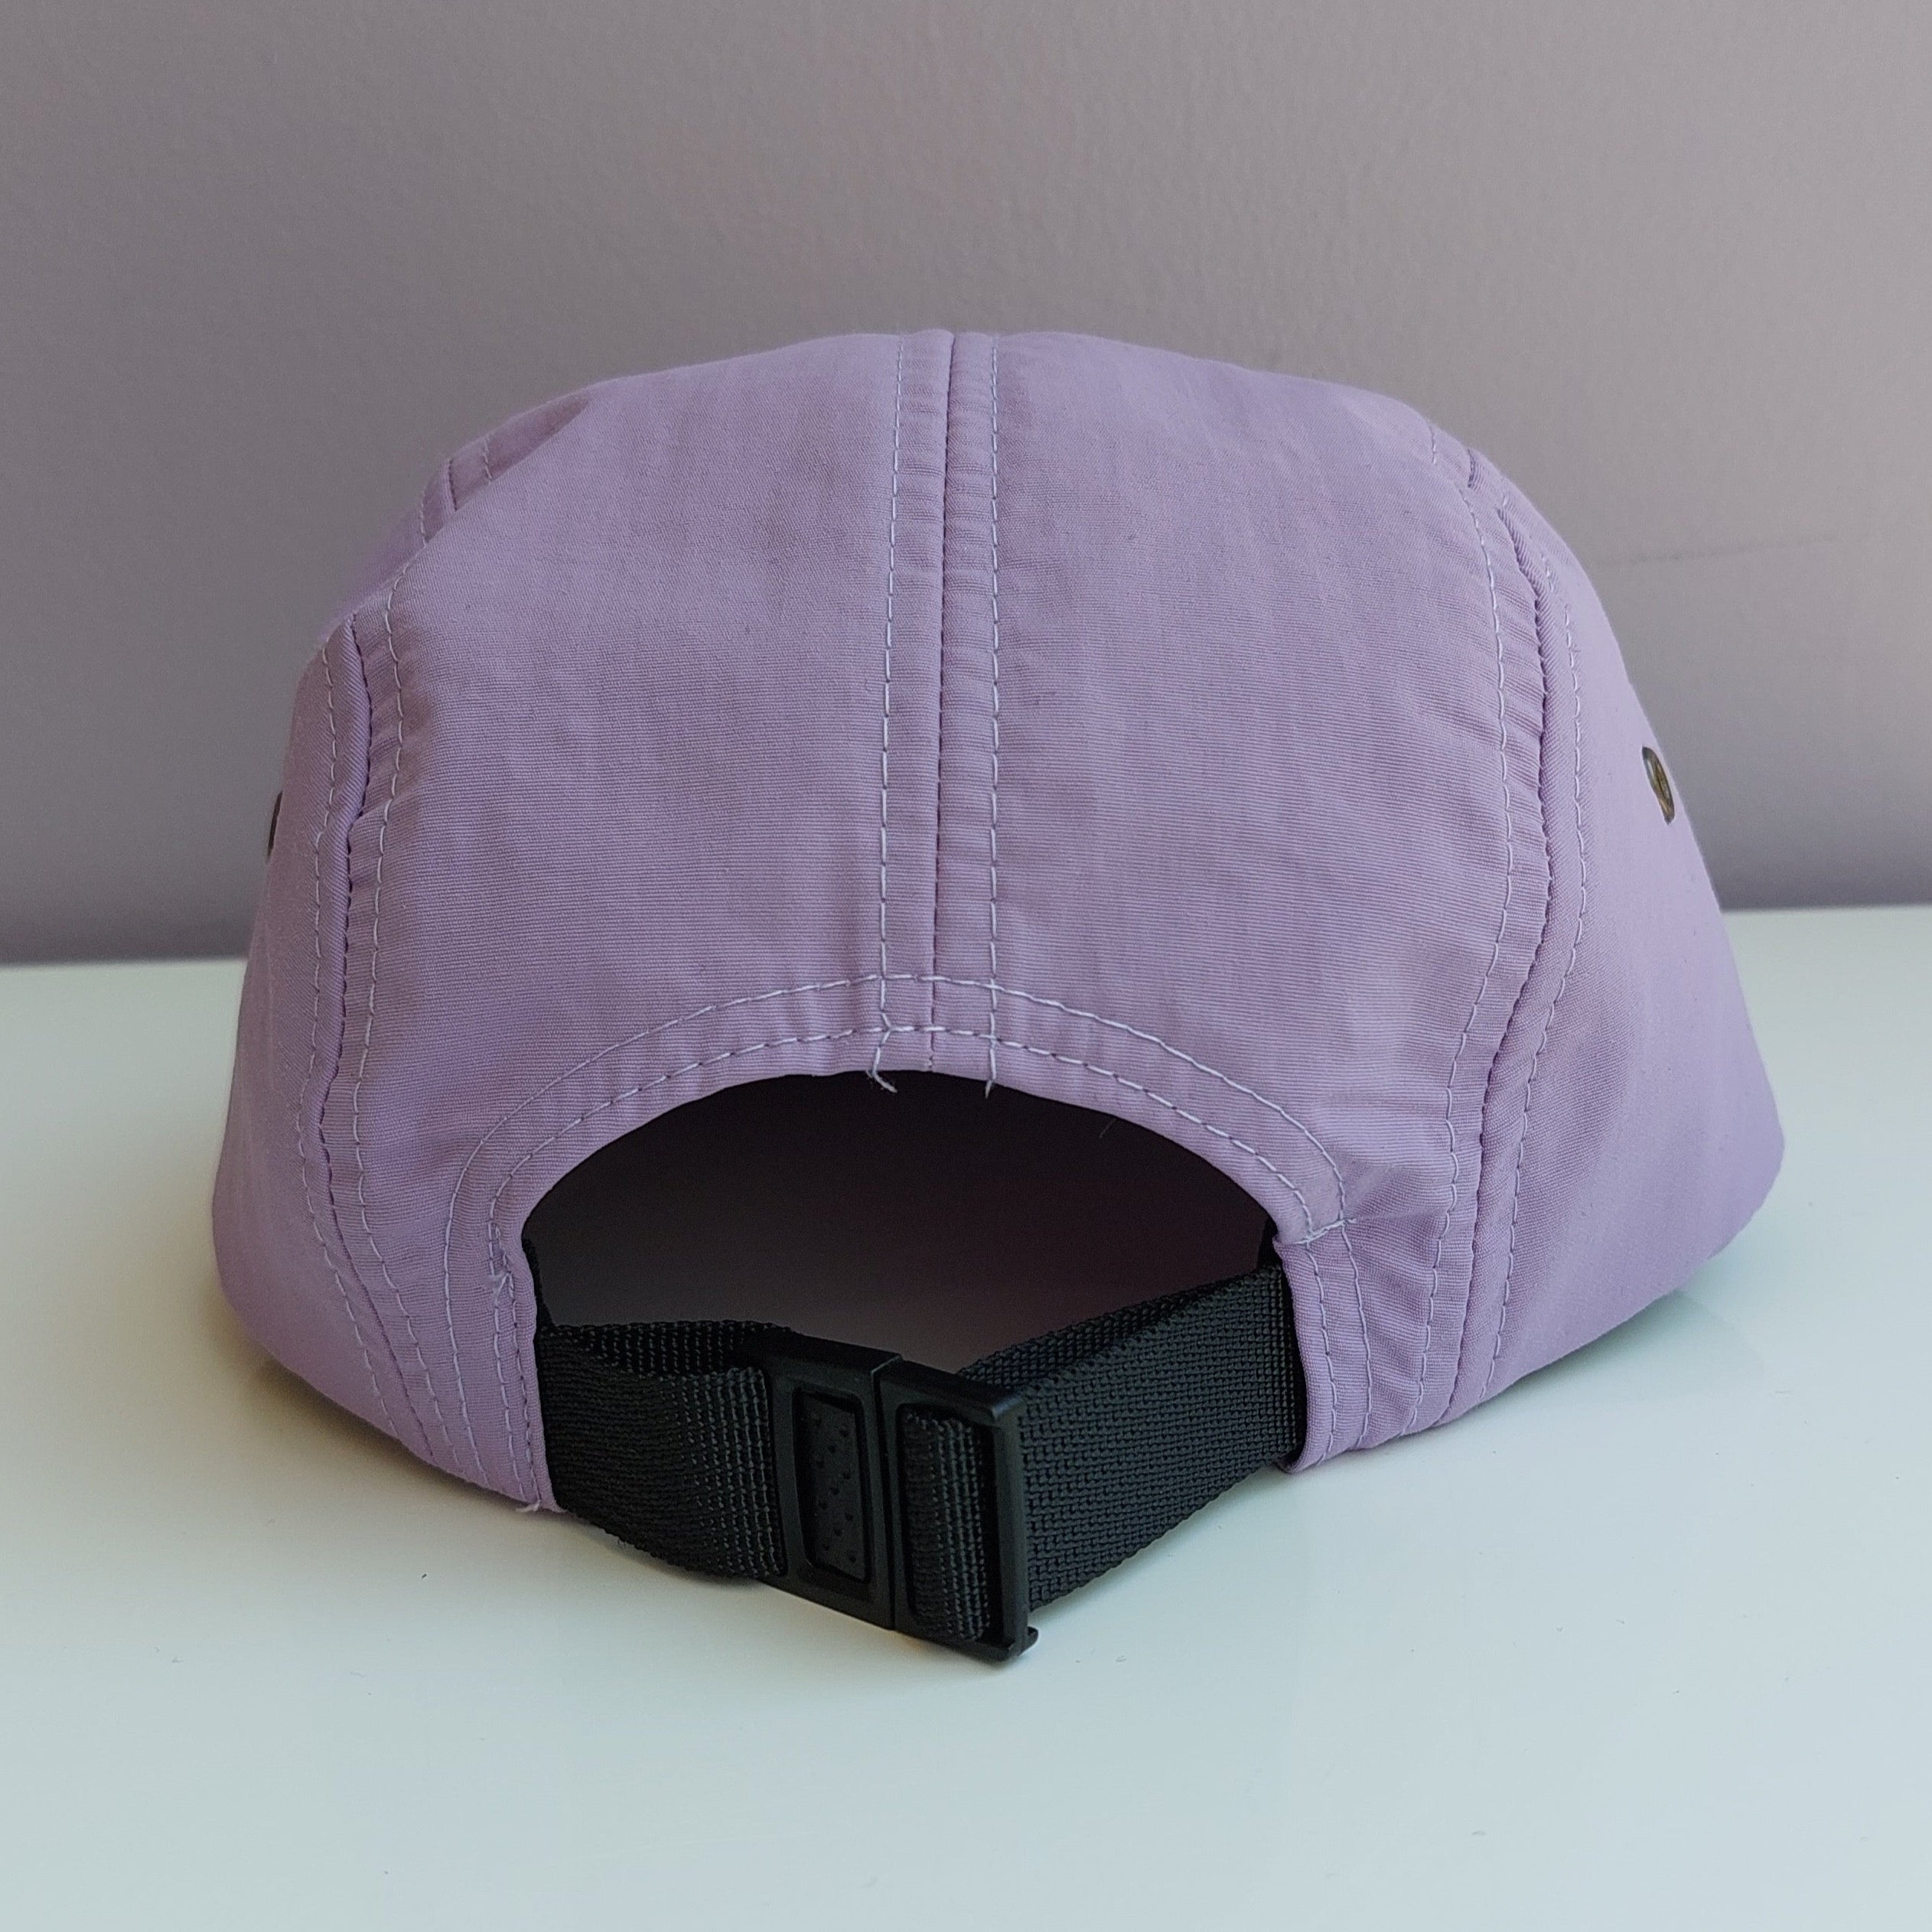 A back view of a light purple 5 panel cap with a black adjustable strap sitting on a white surface with a light purple background.